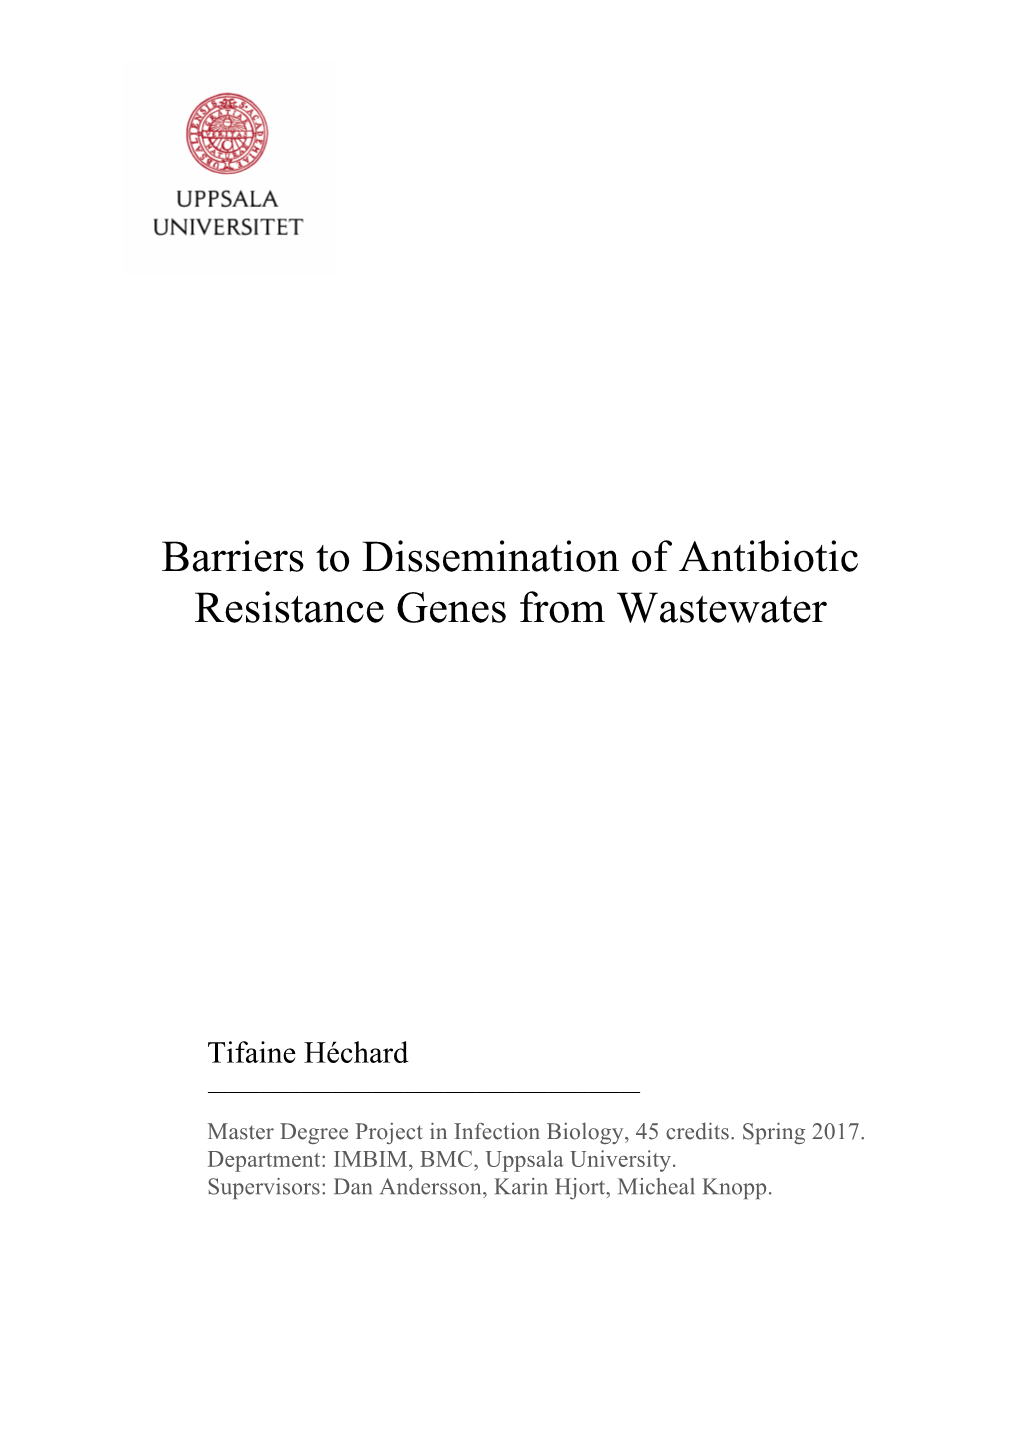 Barriers to Dissemination of Antibiotic Resistance Genes from Wastewater